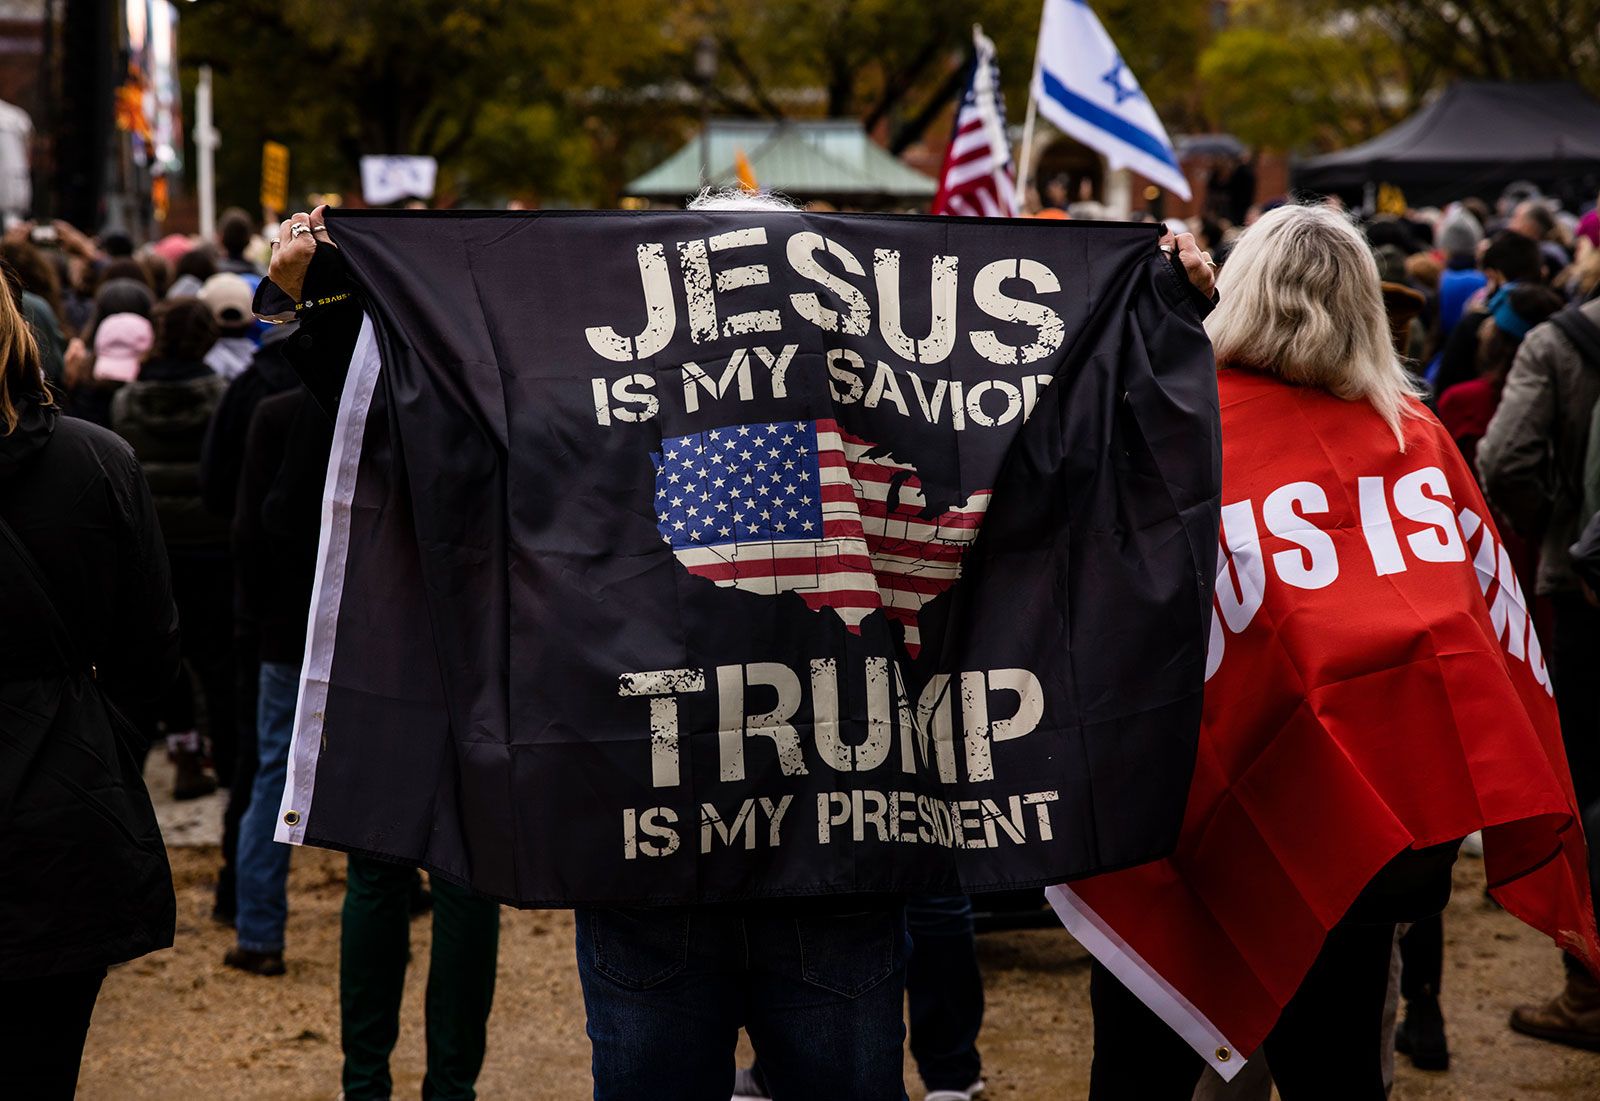 An image of a concert in which an attendee holds up a banner that says, "Jesus is my savior and Trump is my president"